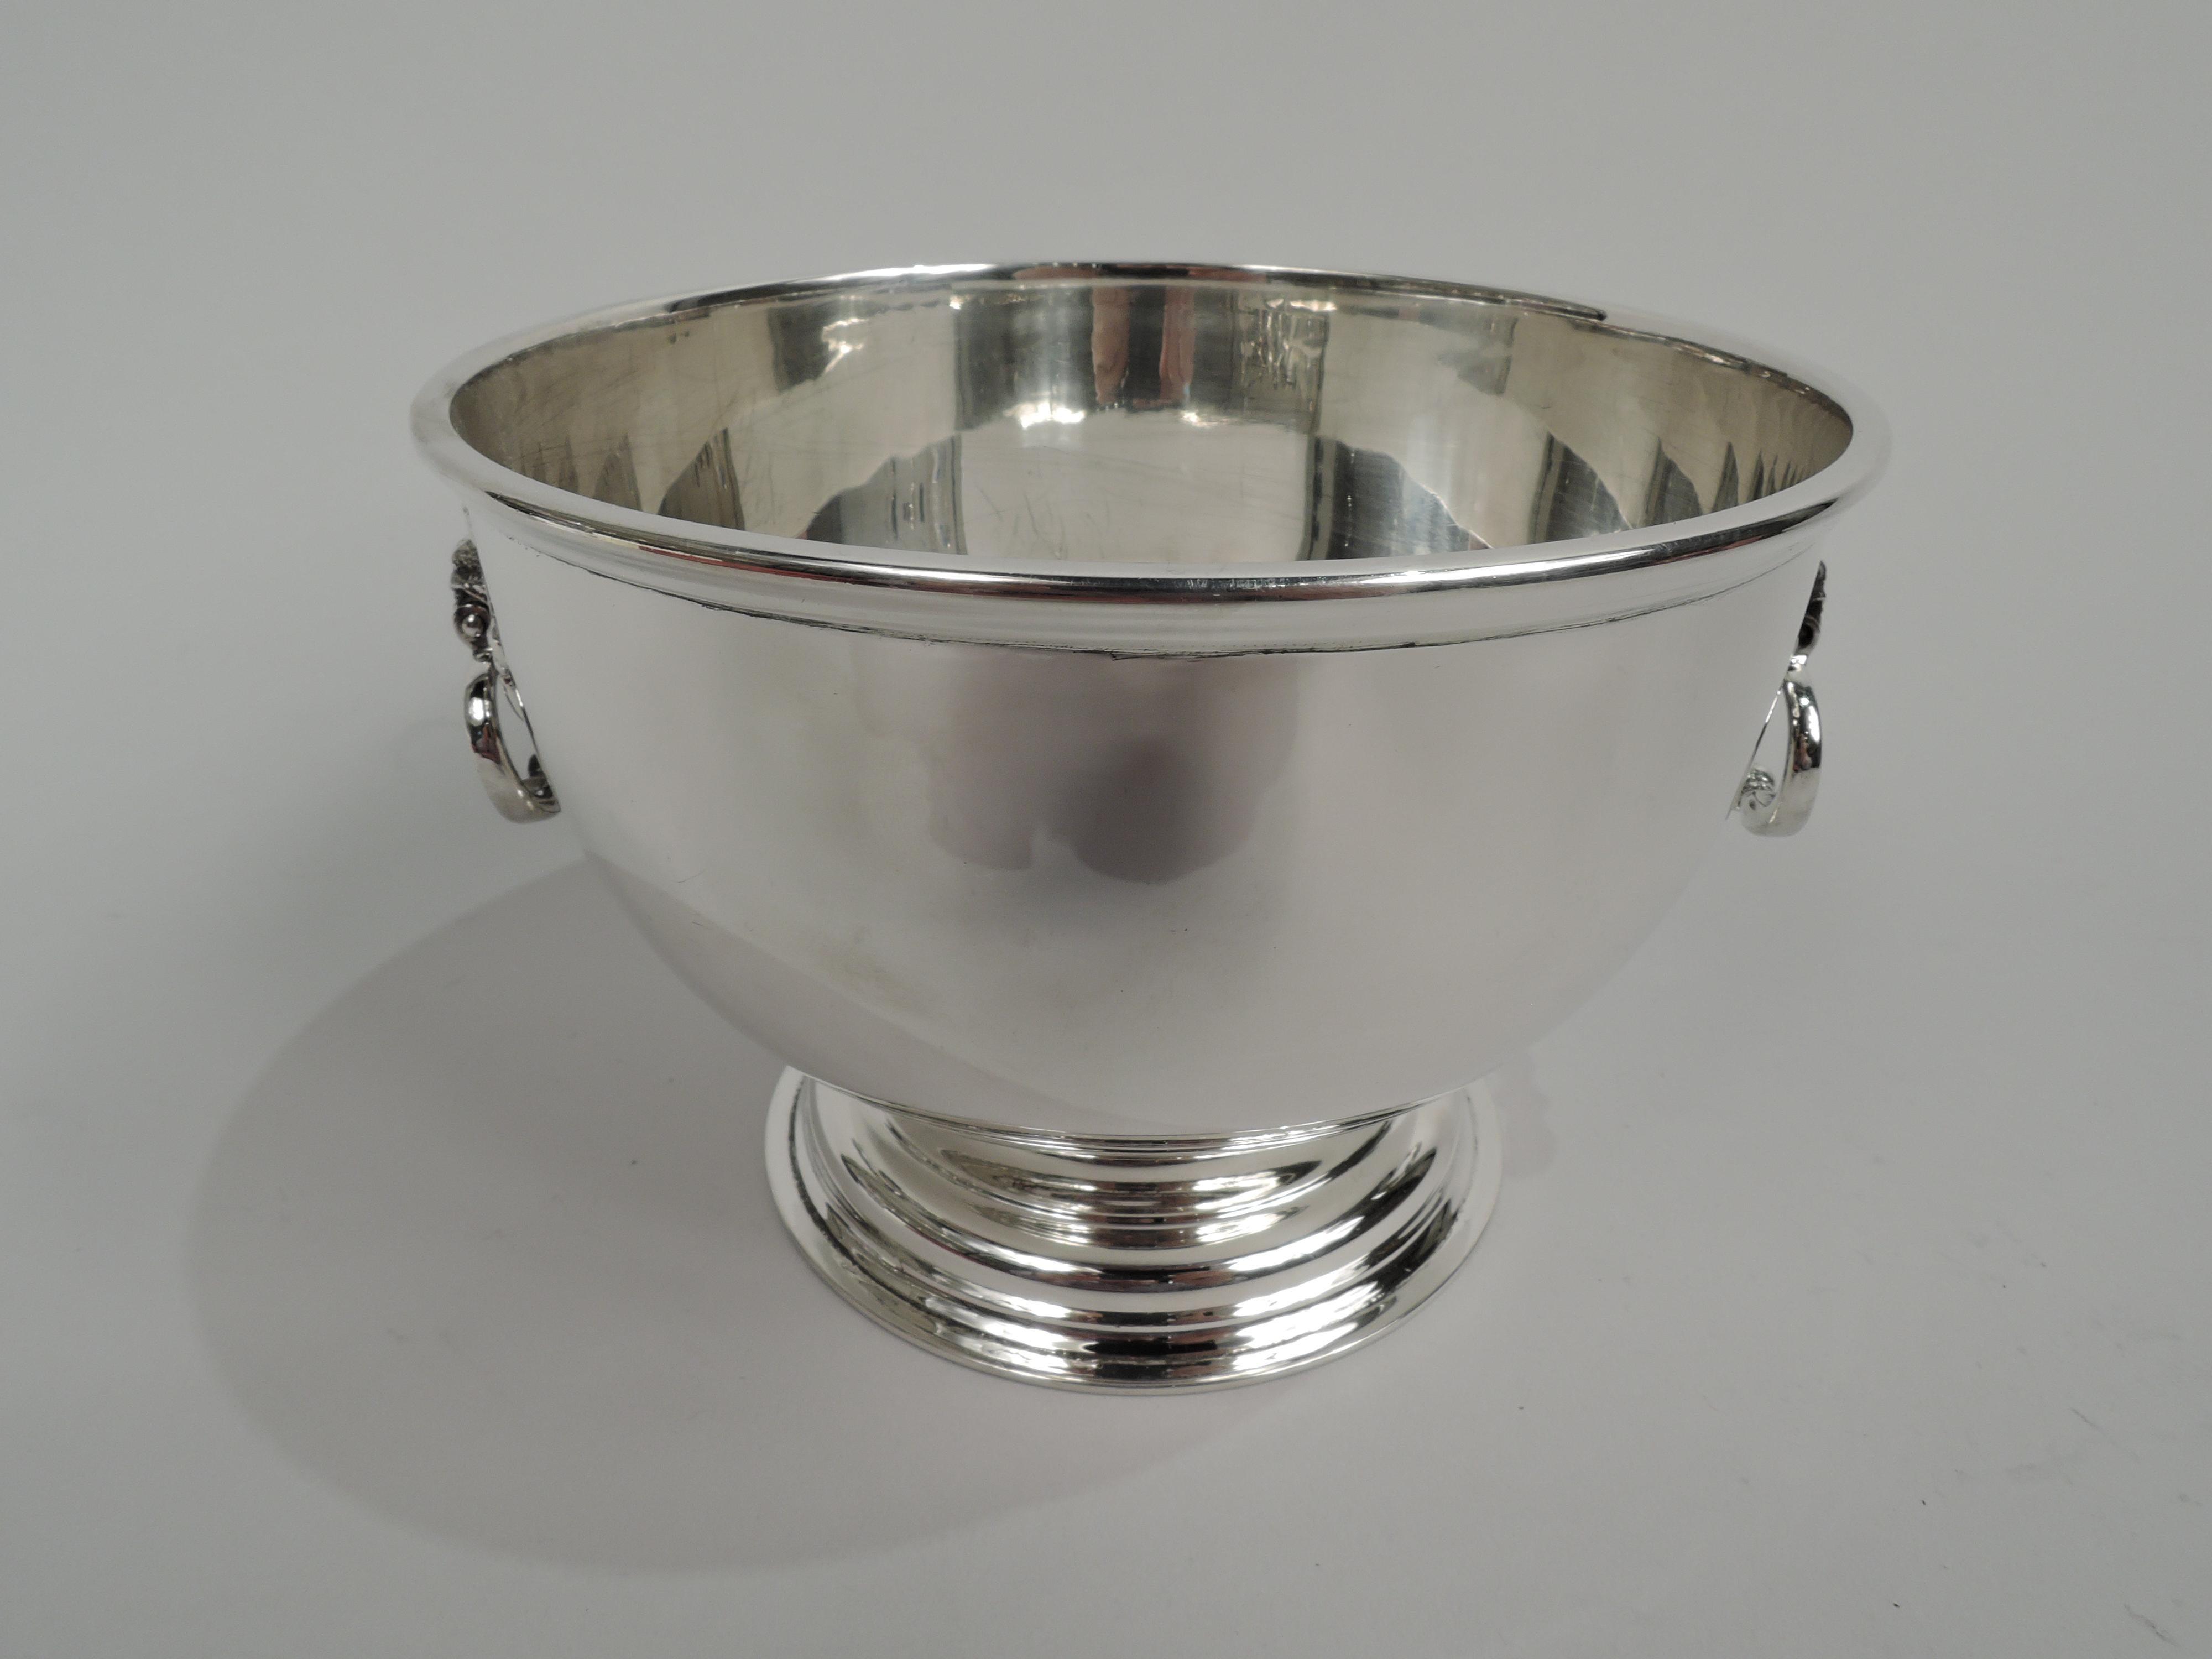 Georgian-style sterling silver trophy bowl. Round and curved with flat rim and stepped foot. Sides have scroll and leaf mounts with loose bead-and-reel oval rings. Traditional with room for engraving. Marked “Sterling”. Weight: 15 troy ounces.